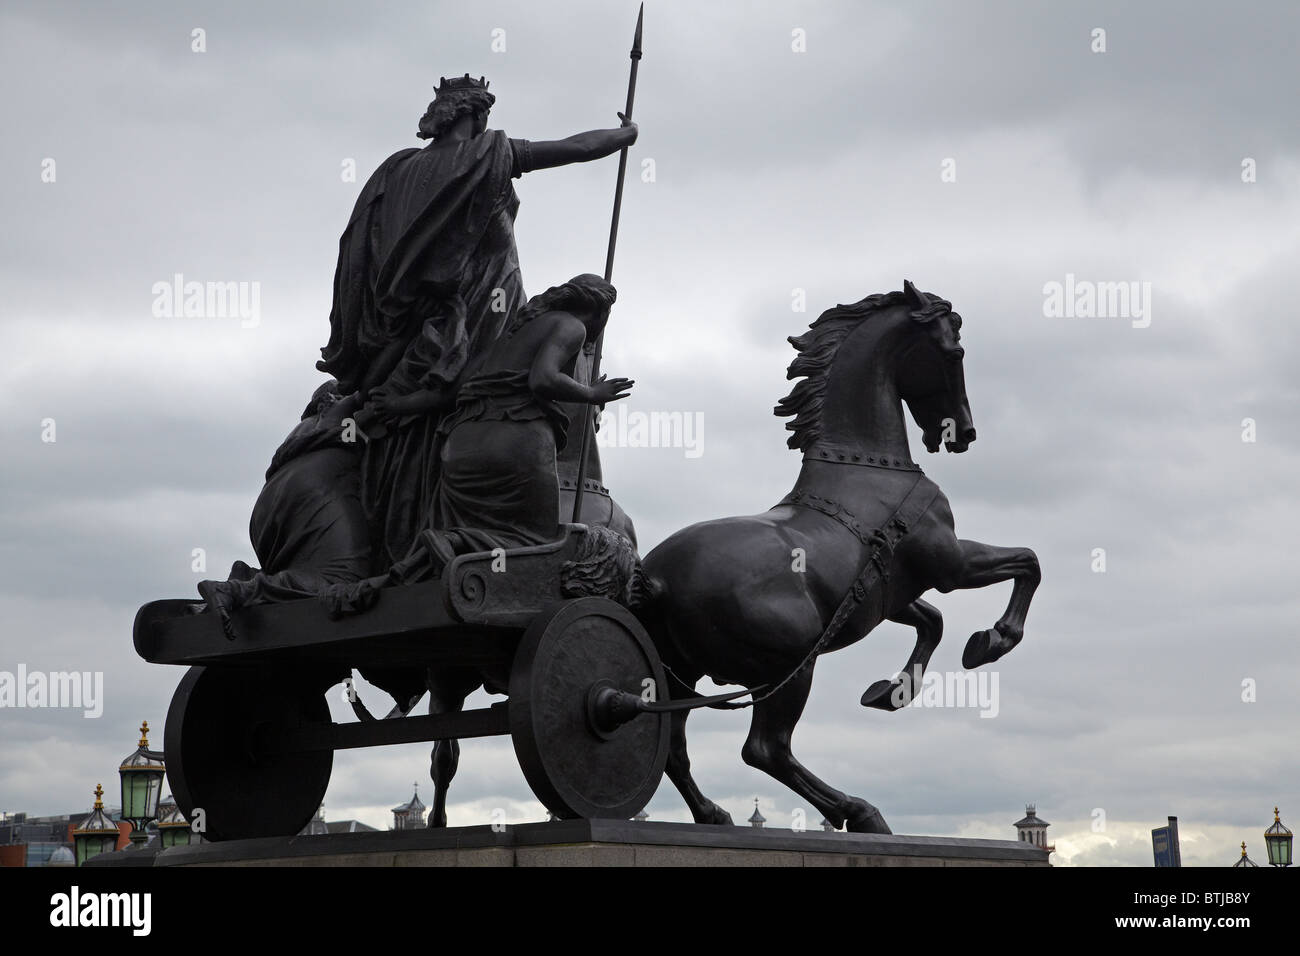 Statue of Boudica or Boudicea and her daughters near Houses of Parliament, London, England, United Kingdom Stock Photo